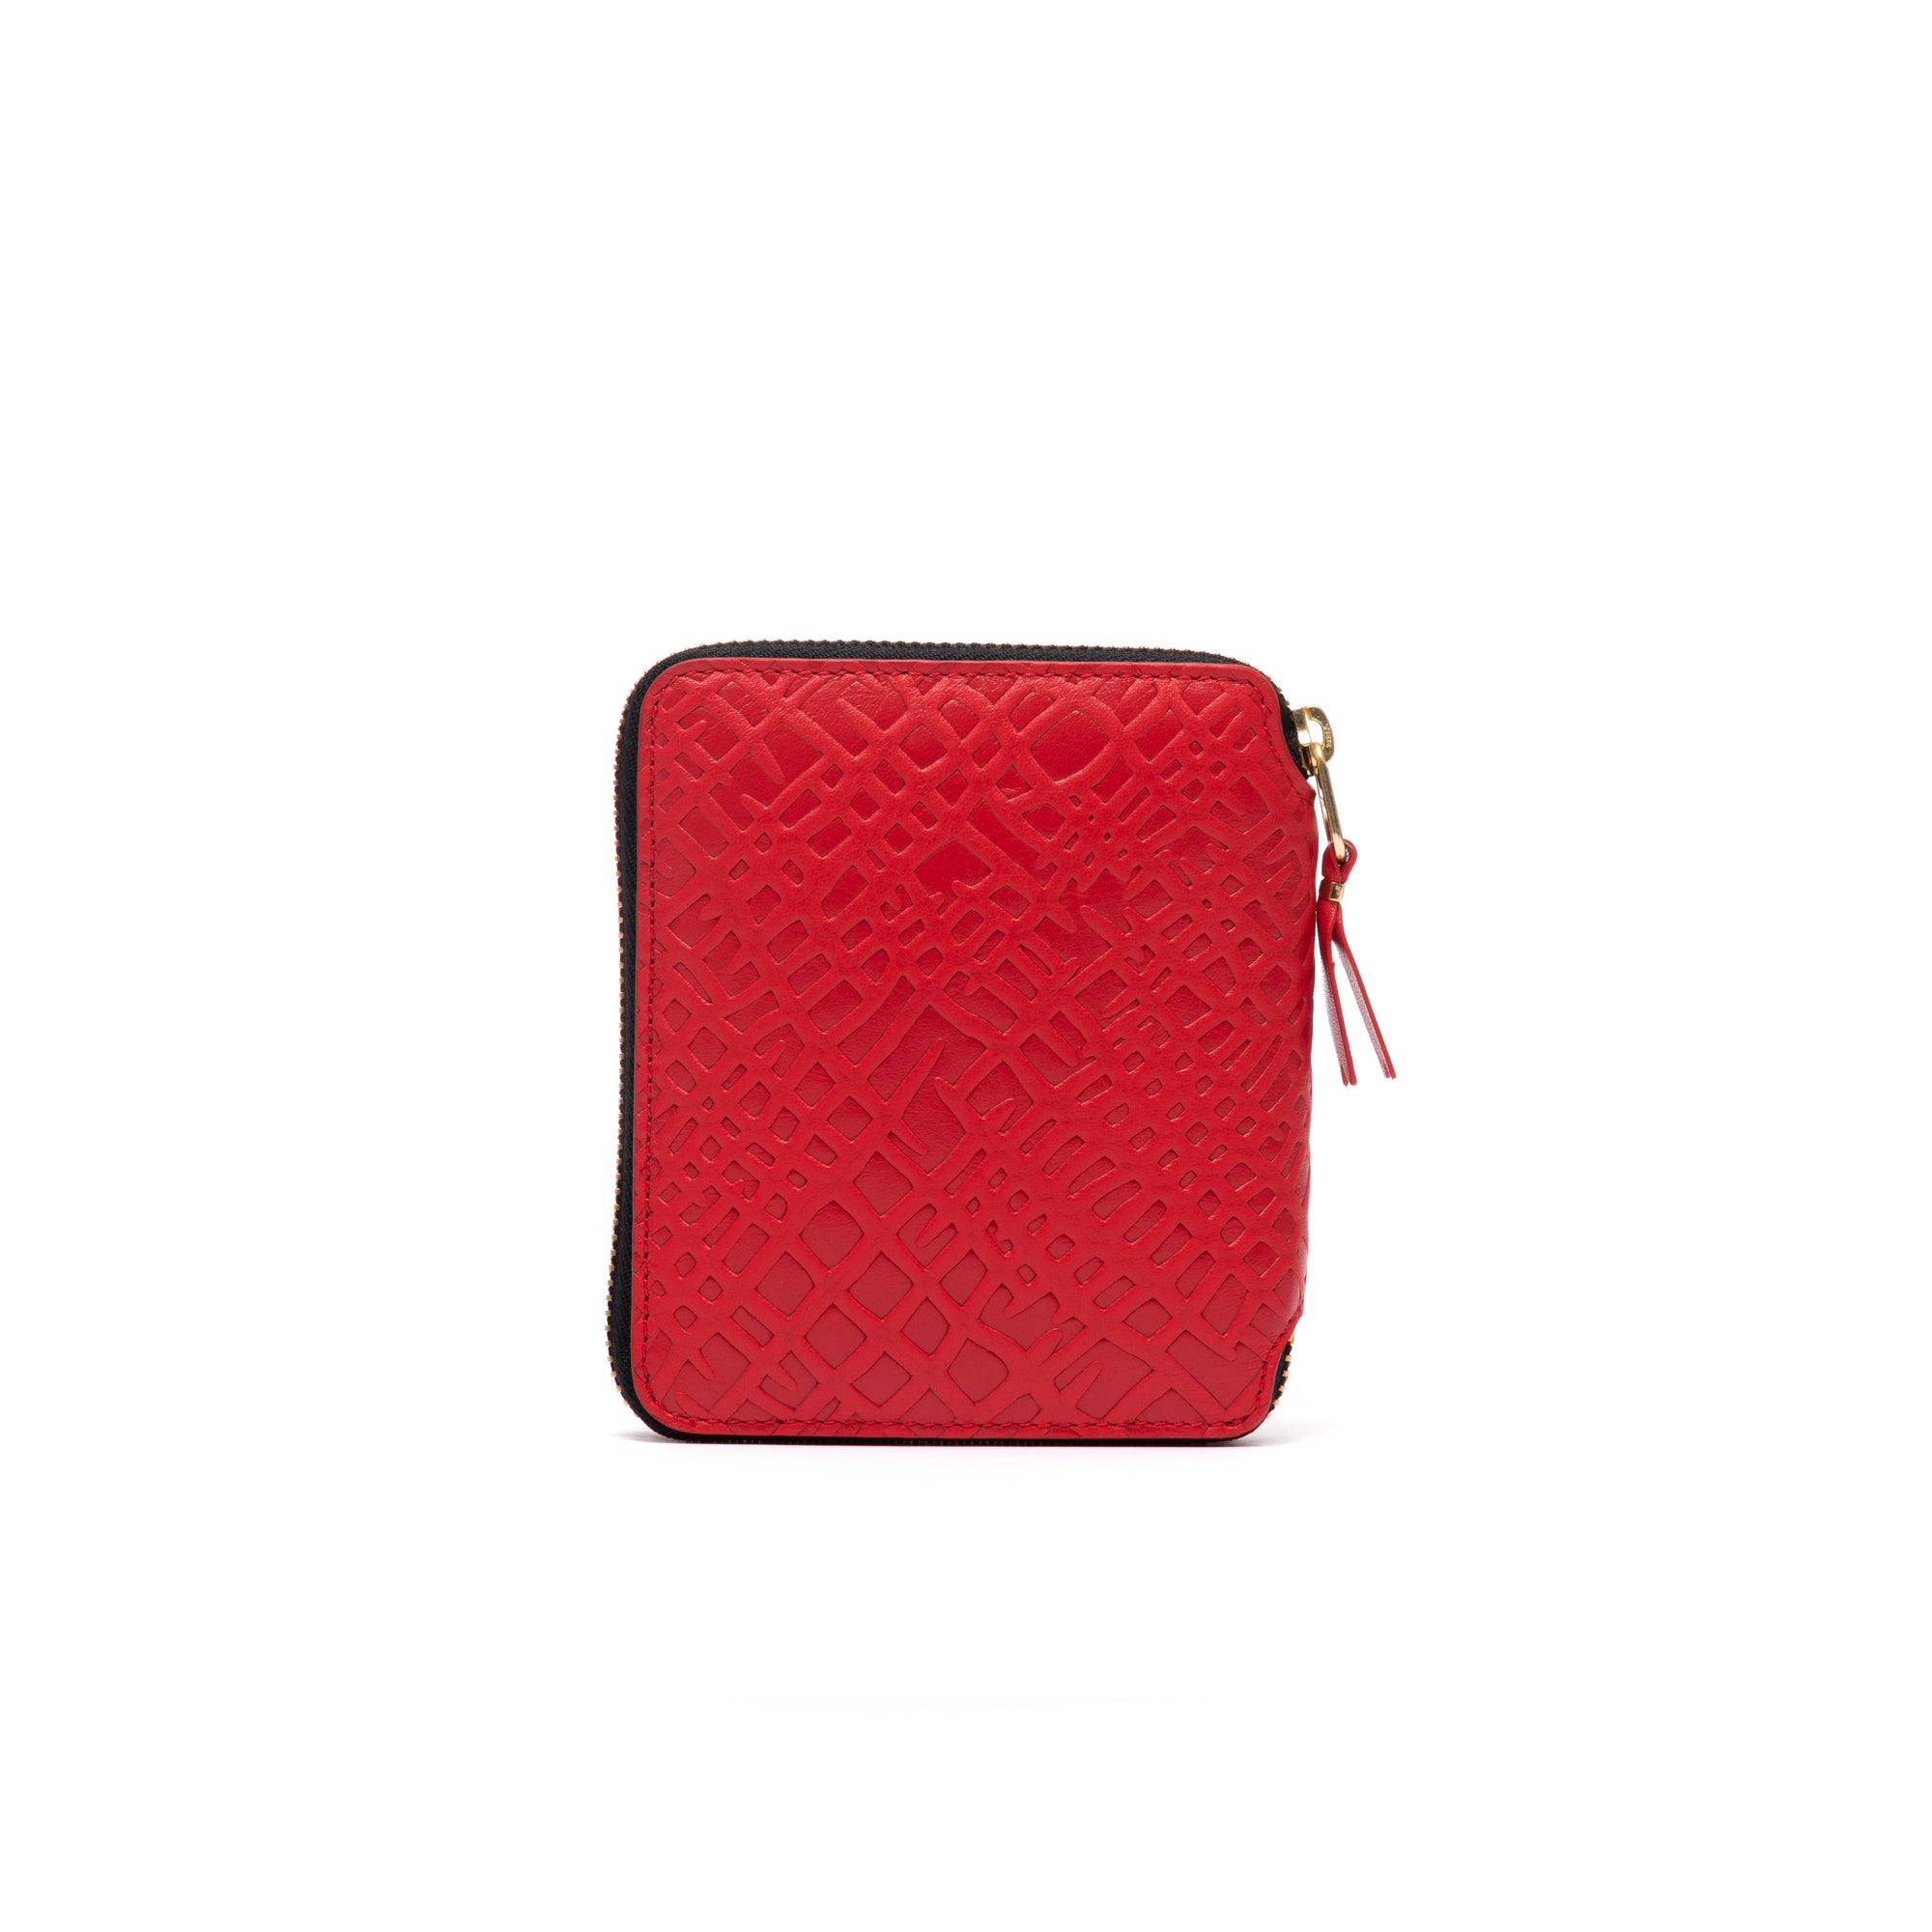 CDG WALLET - Embossed Roots - (SA2100ER Red) view 2